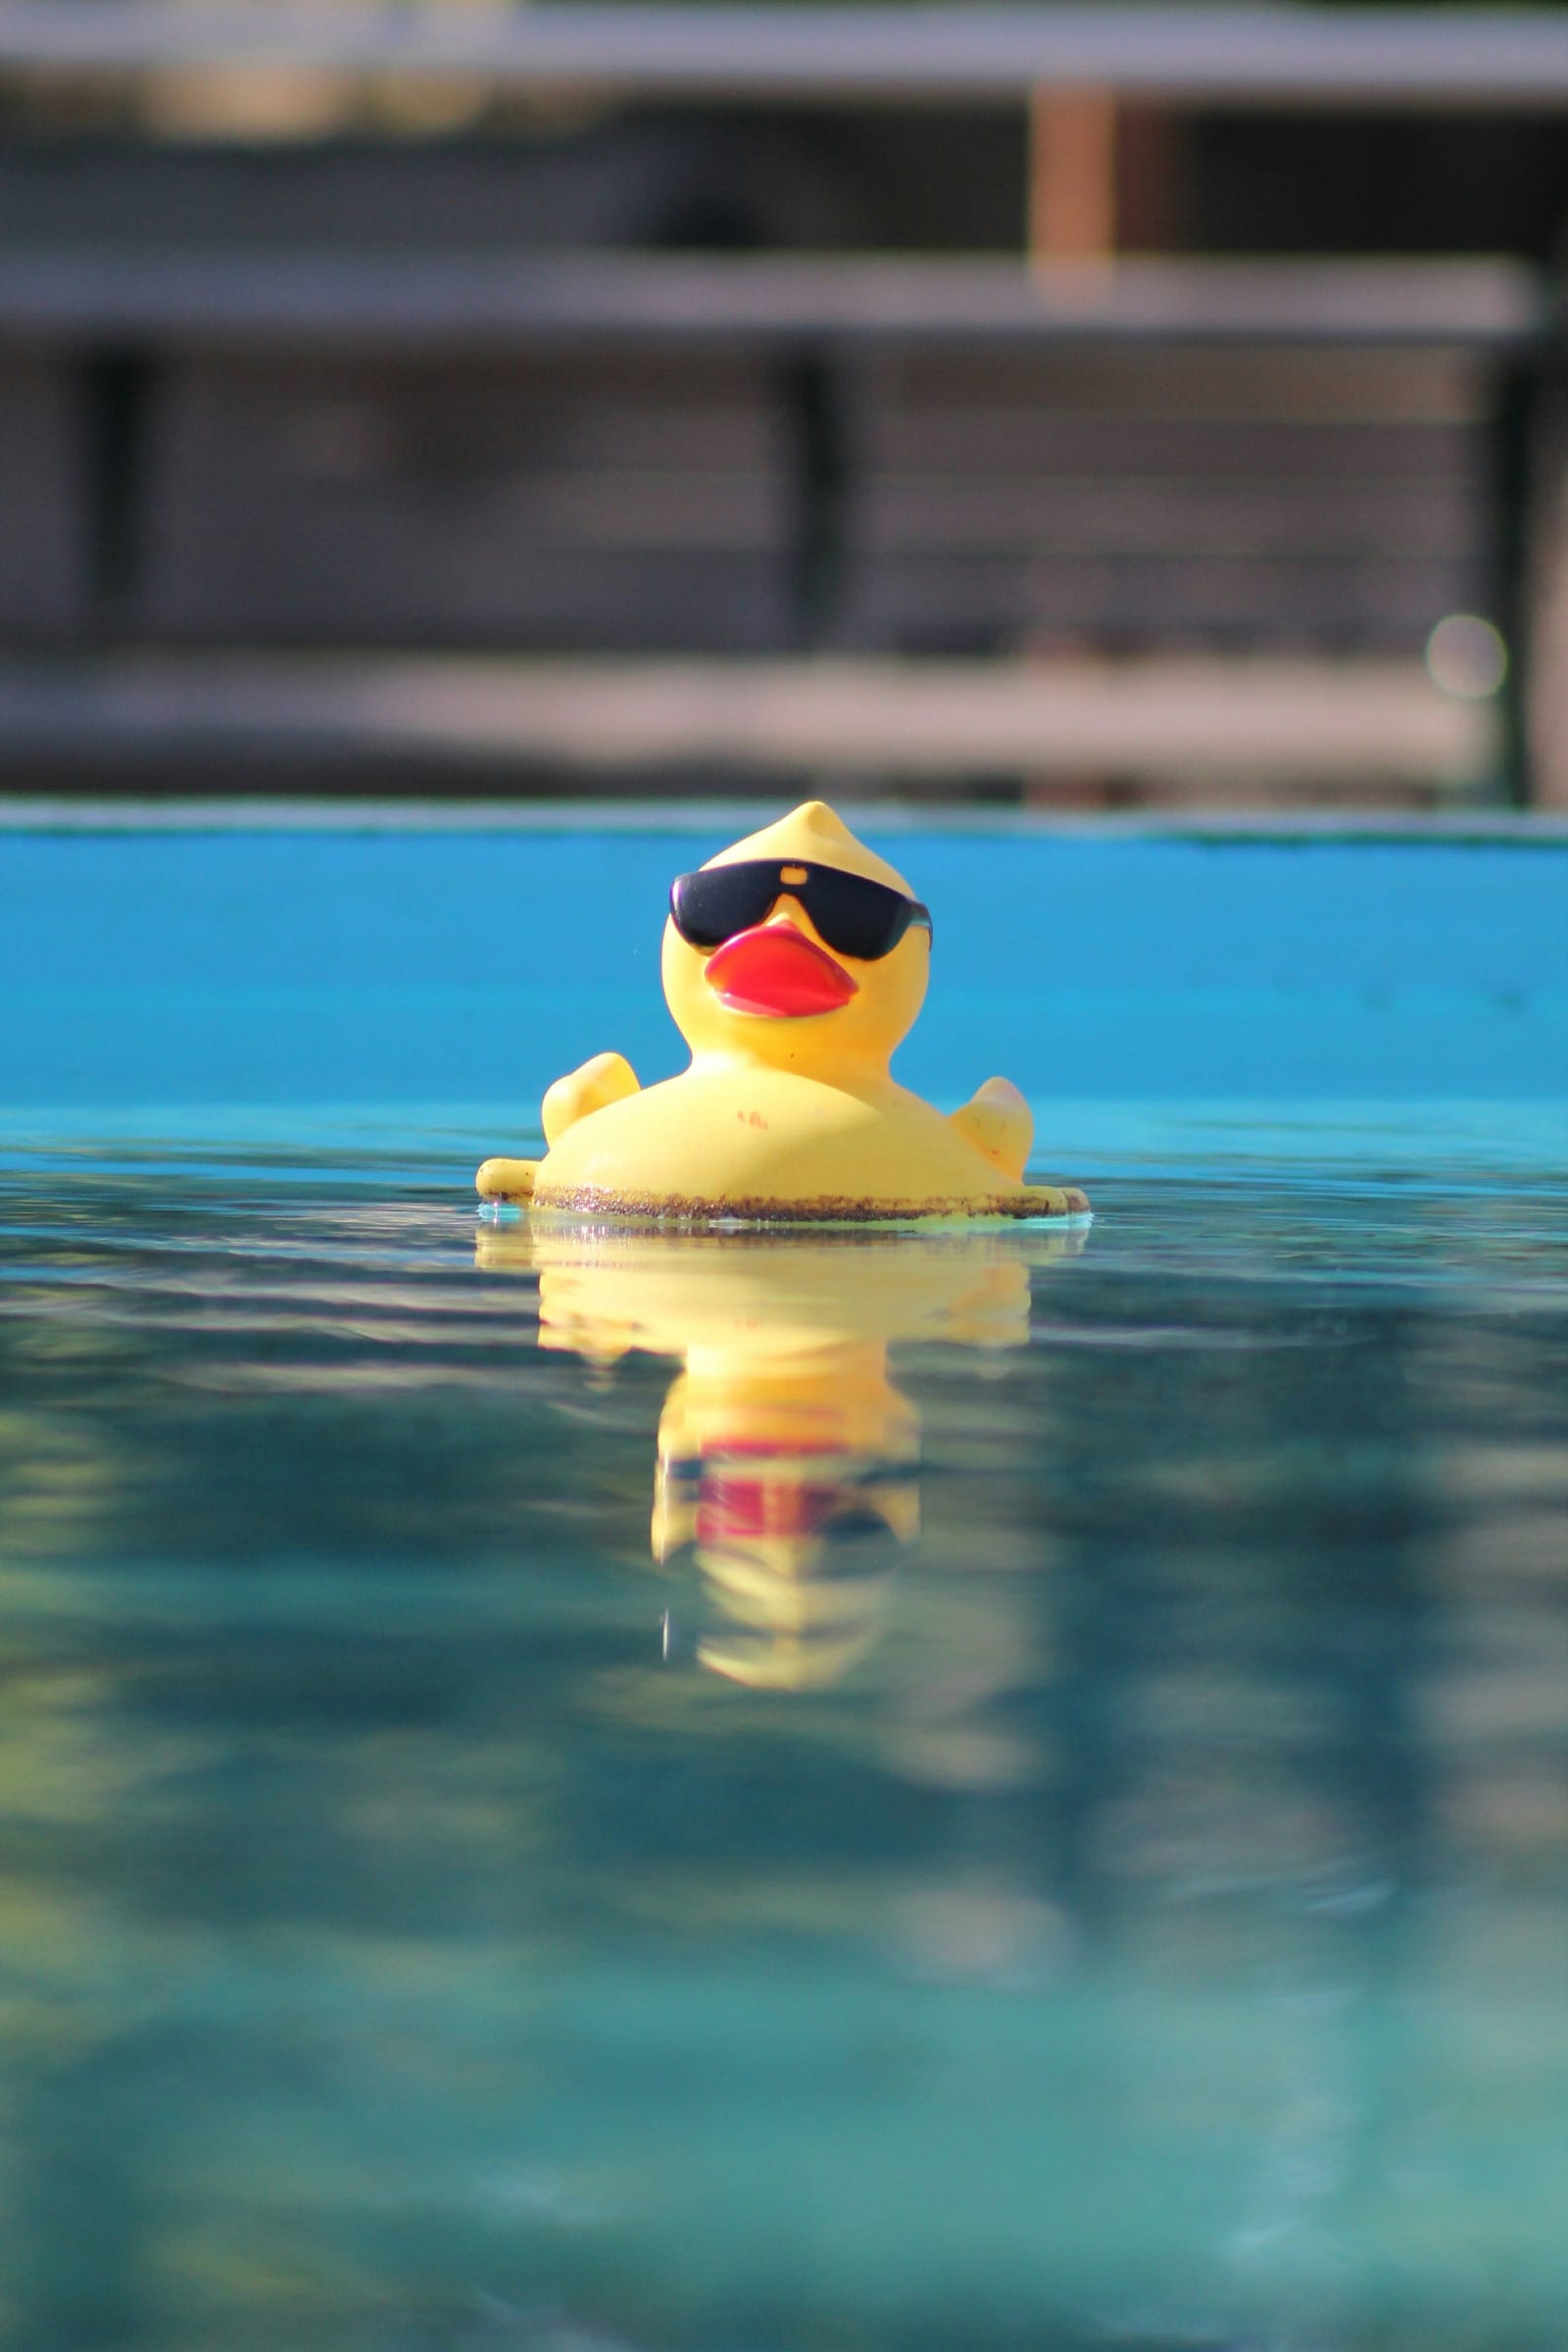 A yellow rubber ducky floats on what looks like an above-ground swimming pool. The ducky is wearing sunglasses.